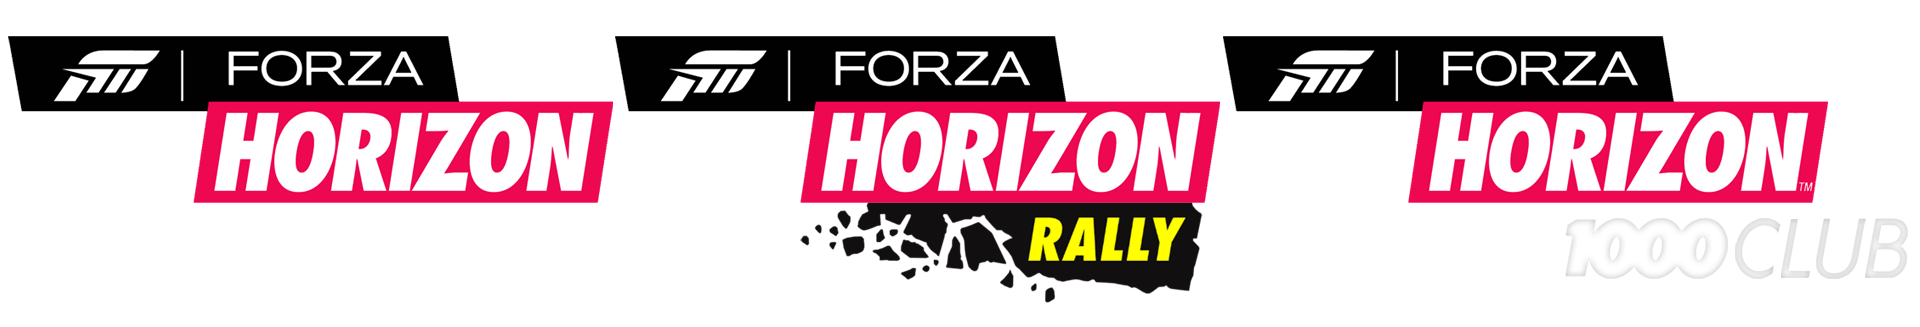 Forza Logo - Forza Wallpapers + Wallpaper ToolKit - Off-Topic - Forza Motorsport ...